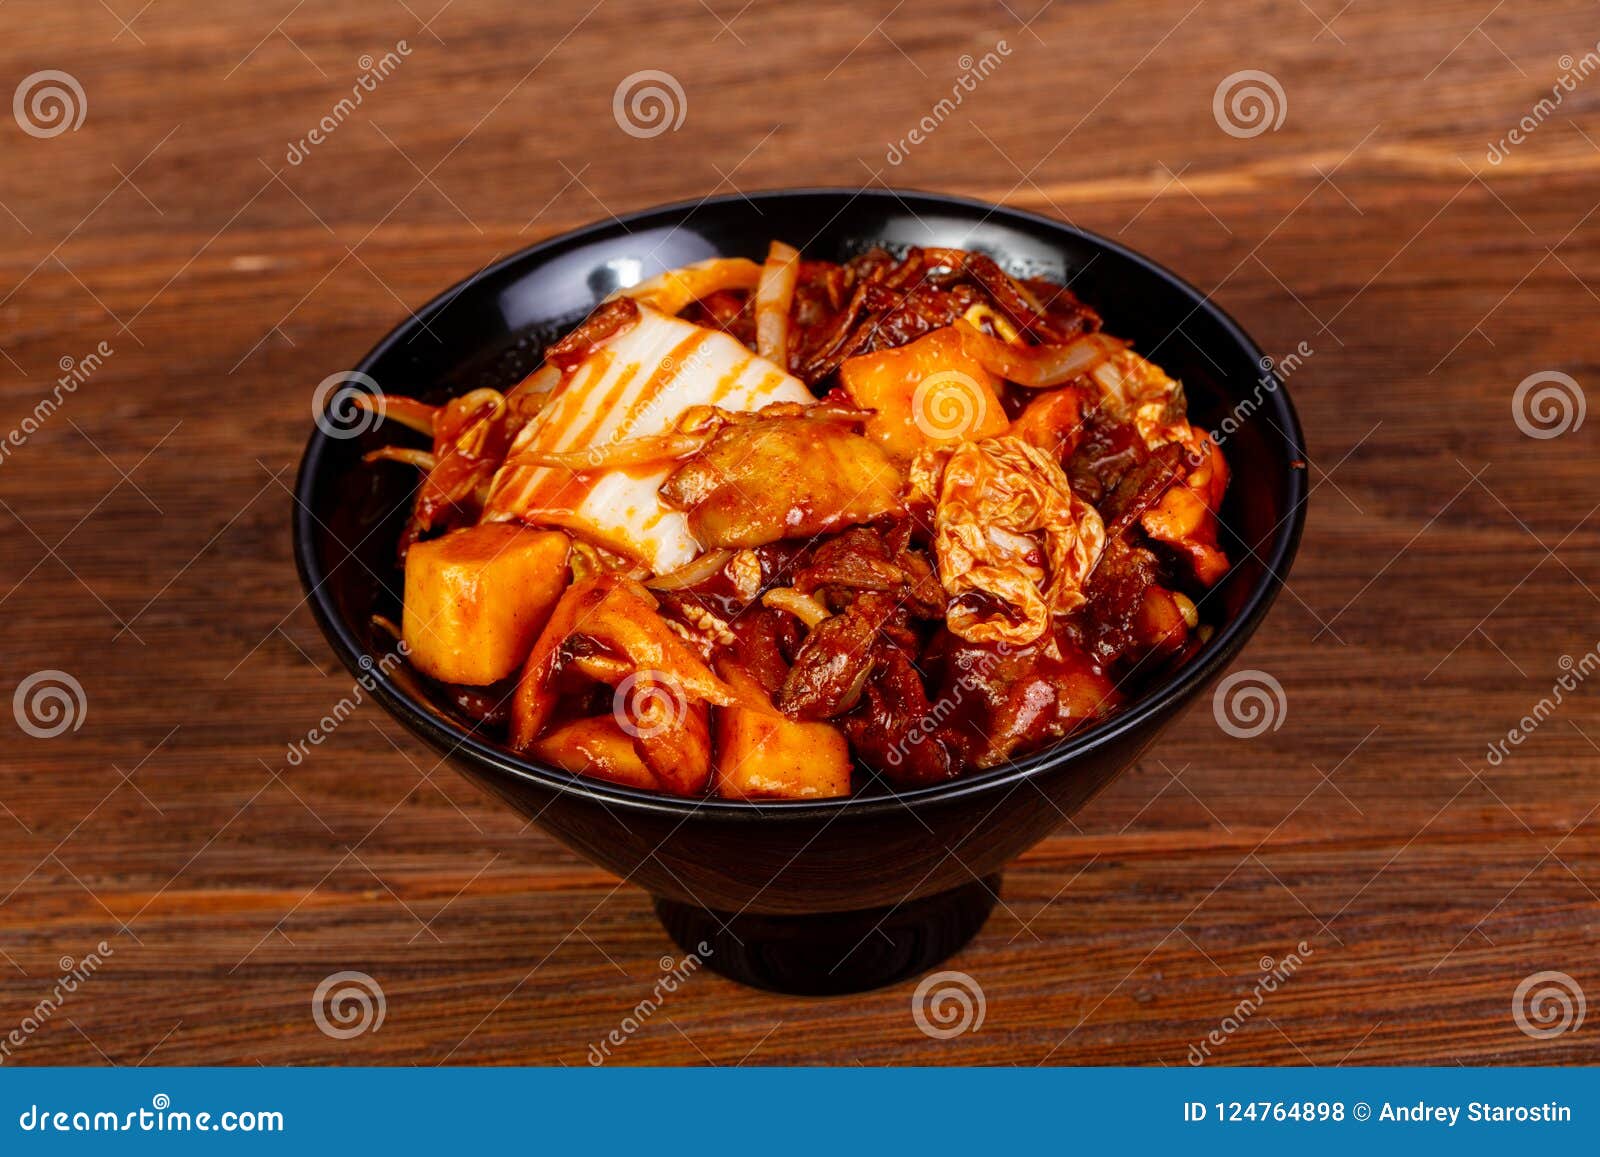 Kimchi with beef stock photo. Image of barbecue, deopbap - 124764898